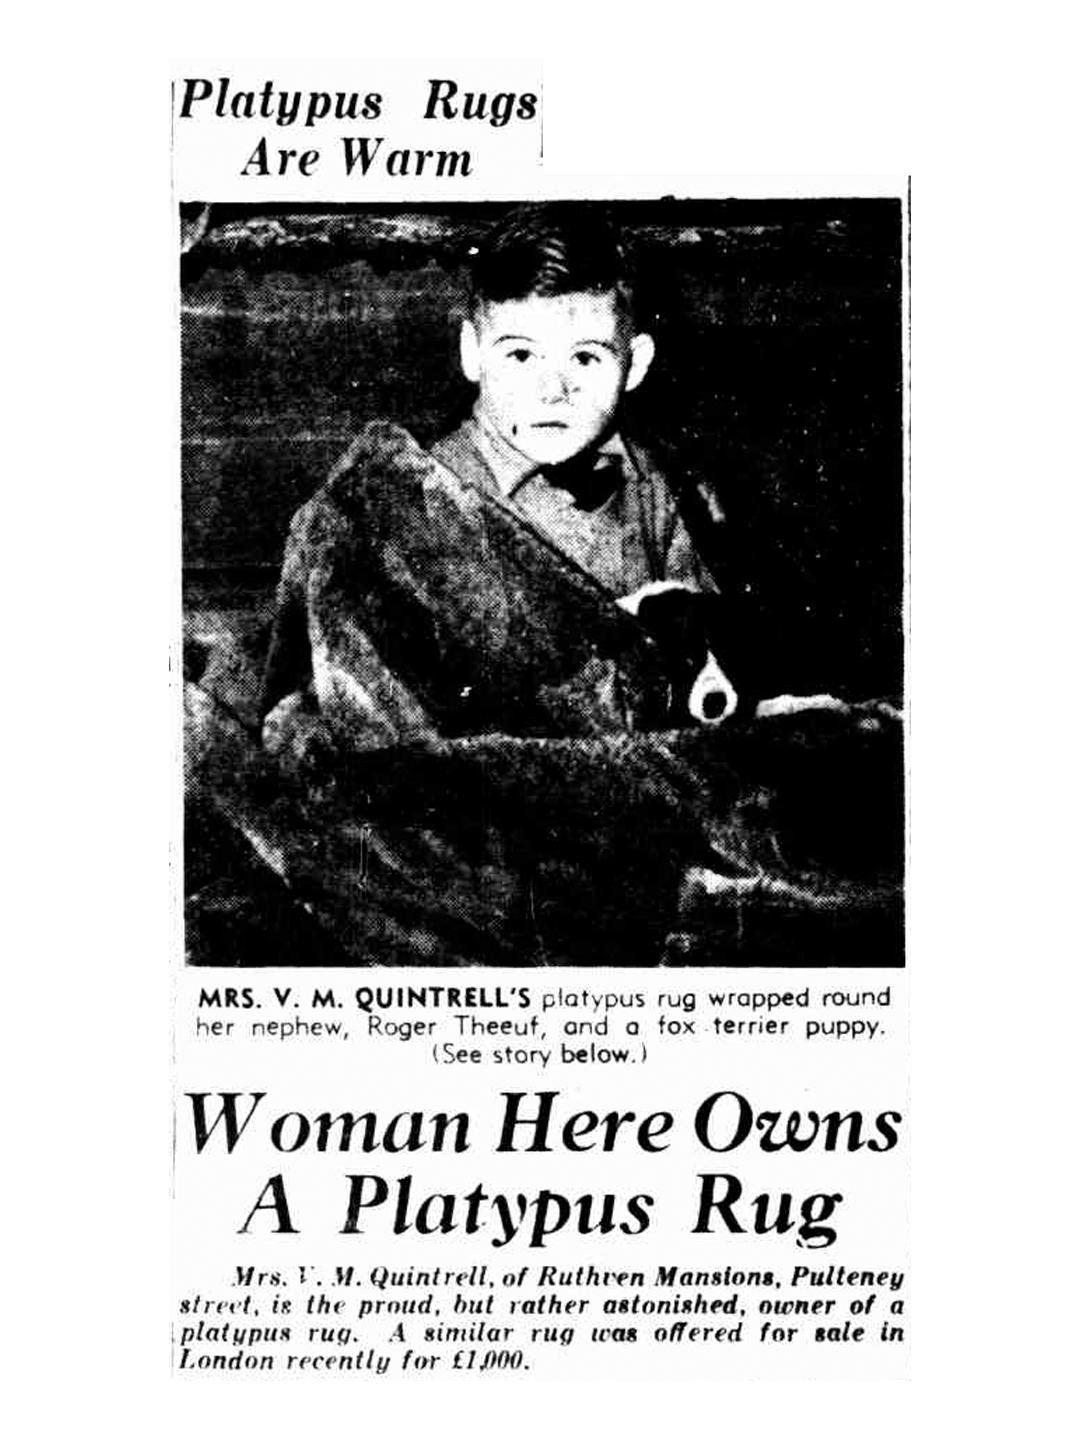 A black and white newspaper clipping showing a boy wrapped in a platypus skin rug